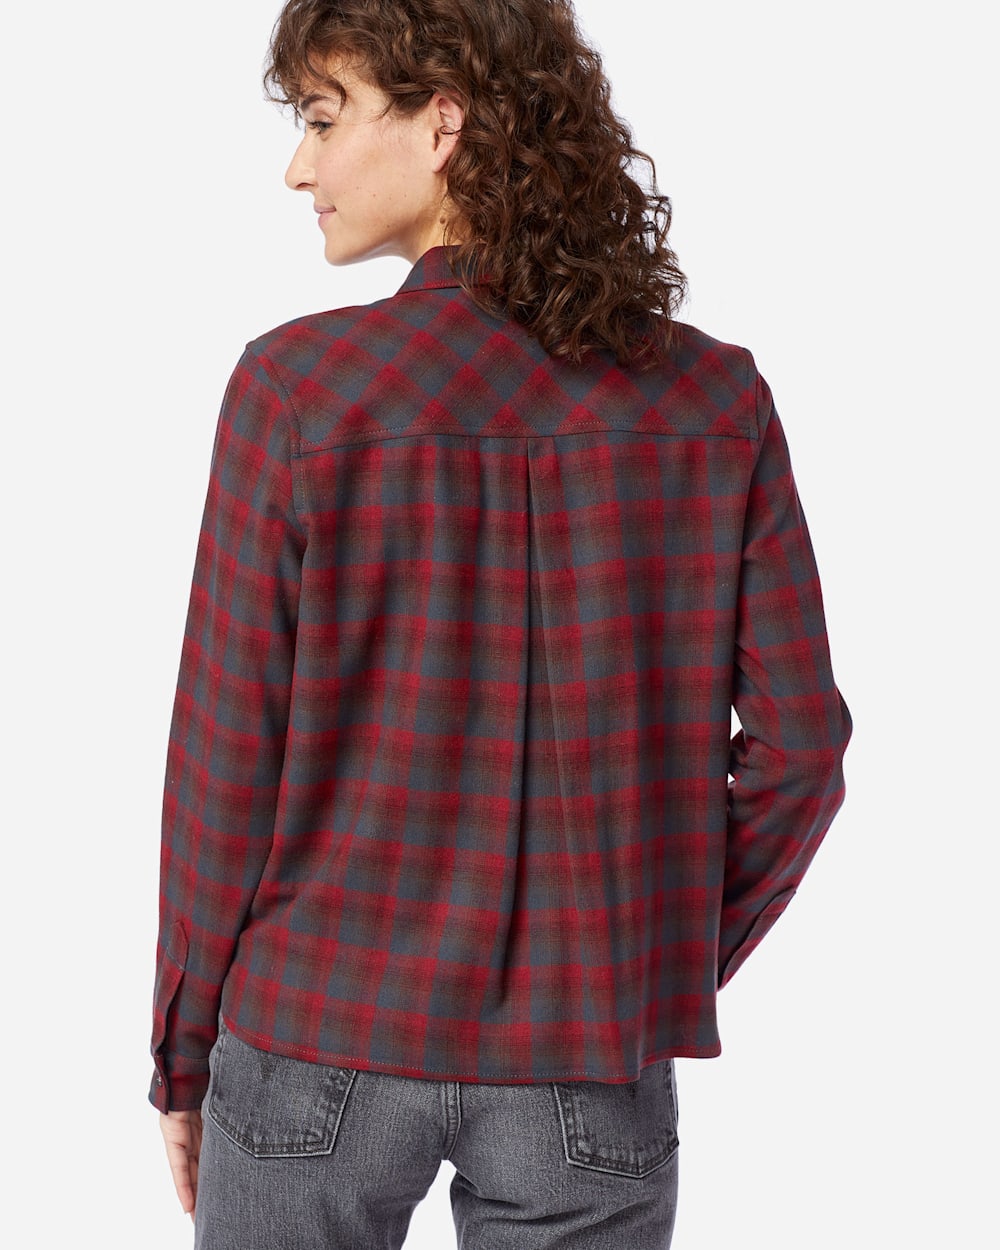 ALTERNATE VIEW OF WOMEN'S ULTRALUXE MERINO PIPER SHIRT IN RED/GREY OMBRE image number 3